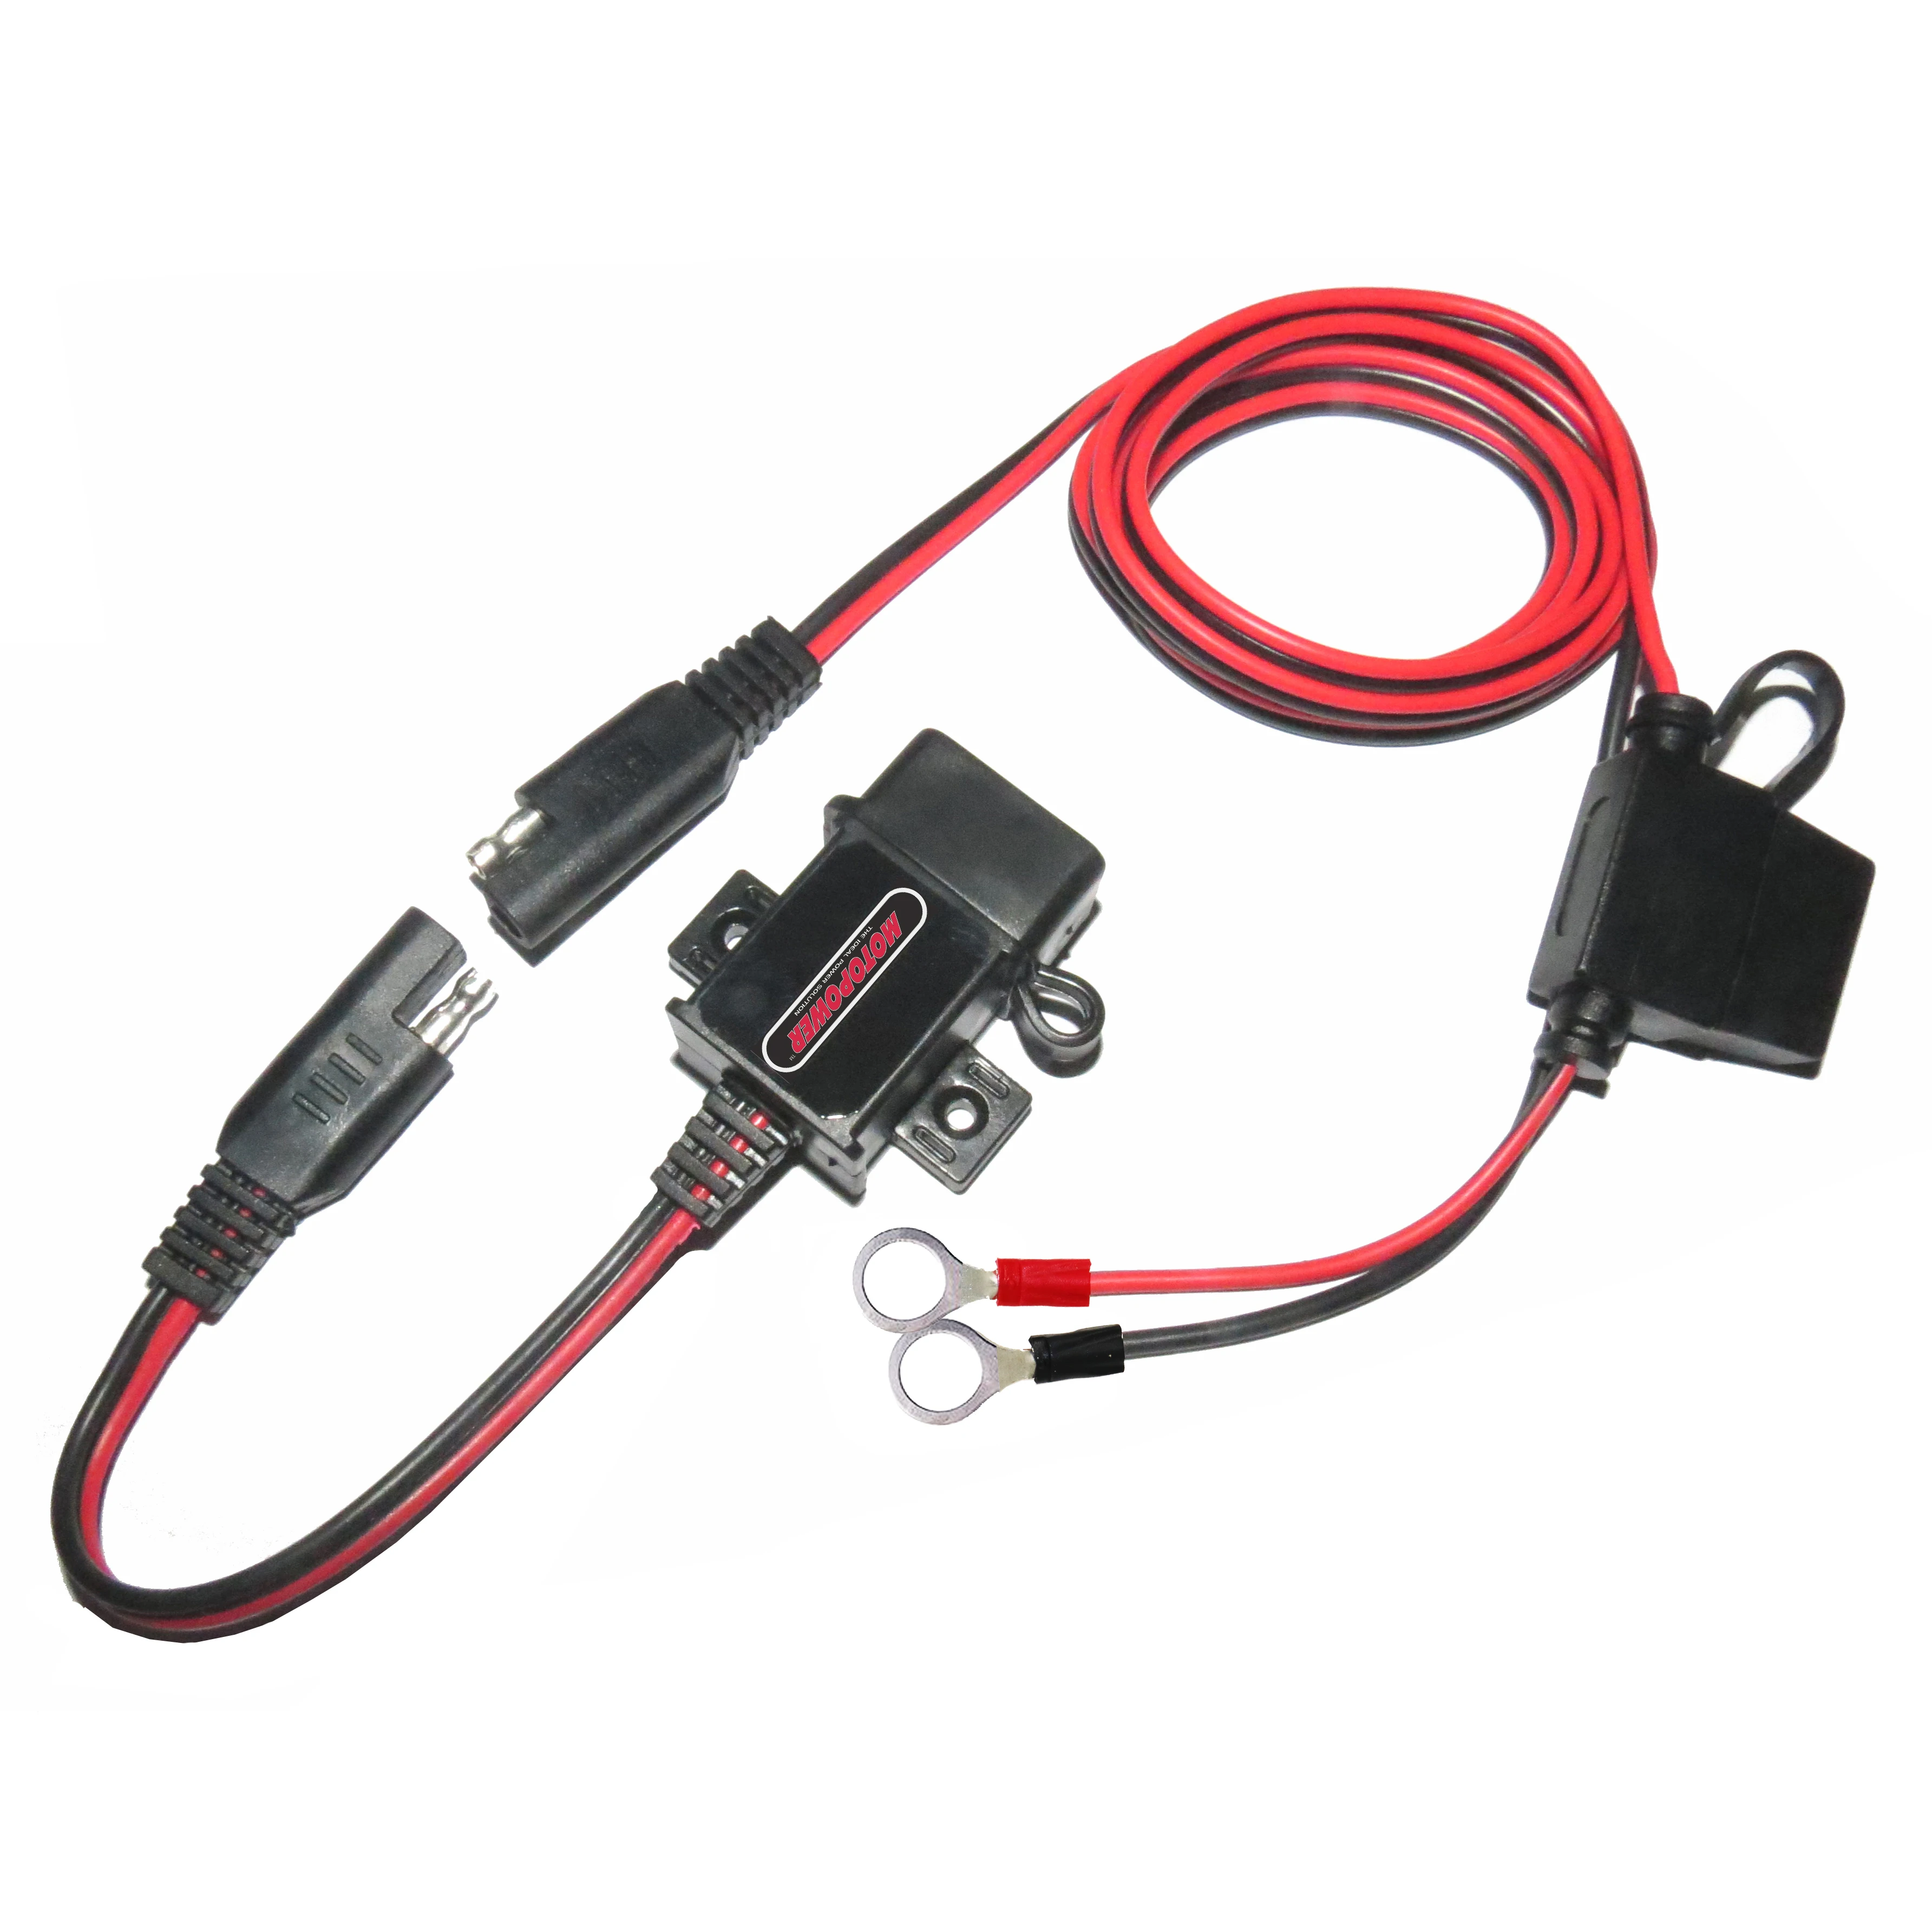 MOTOPOWER MP0609A 3.1Amp Waterproof Motorcycle USB Charger Kit SAE To USB Cable